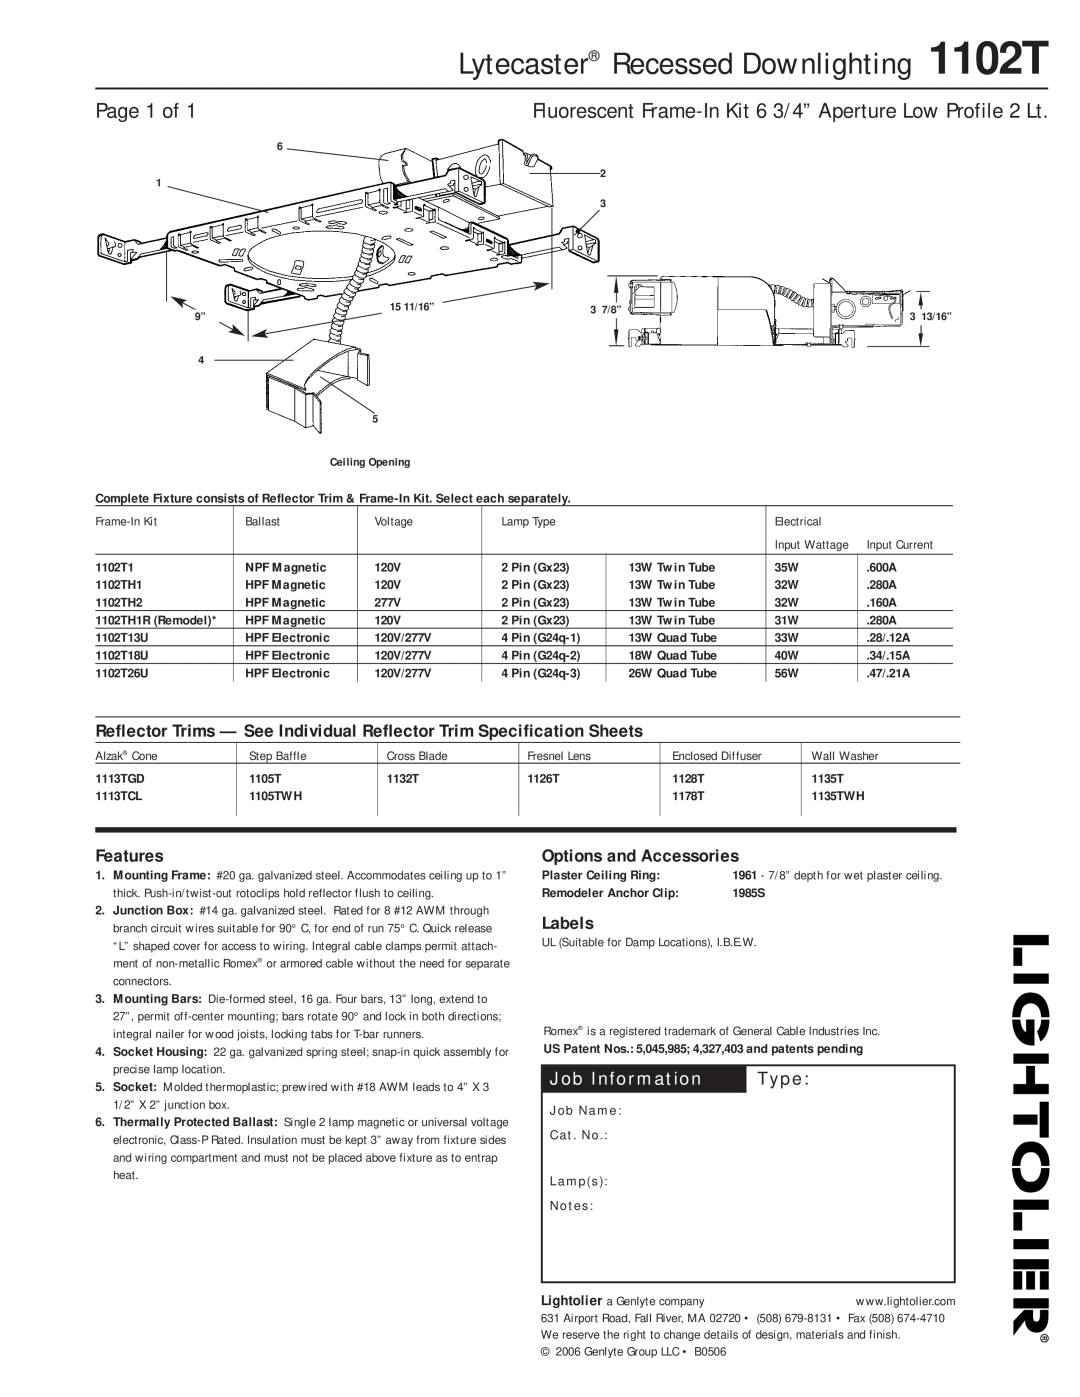 Lightolier specifications Lytecaster Recessed Downlighting 1102T, Page 1 of, Features, Options and Accessories, Labels 